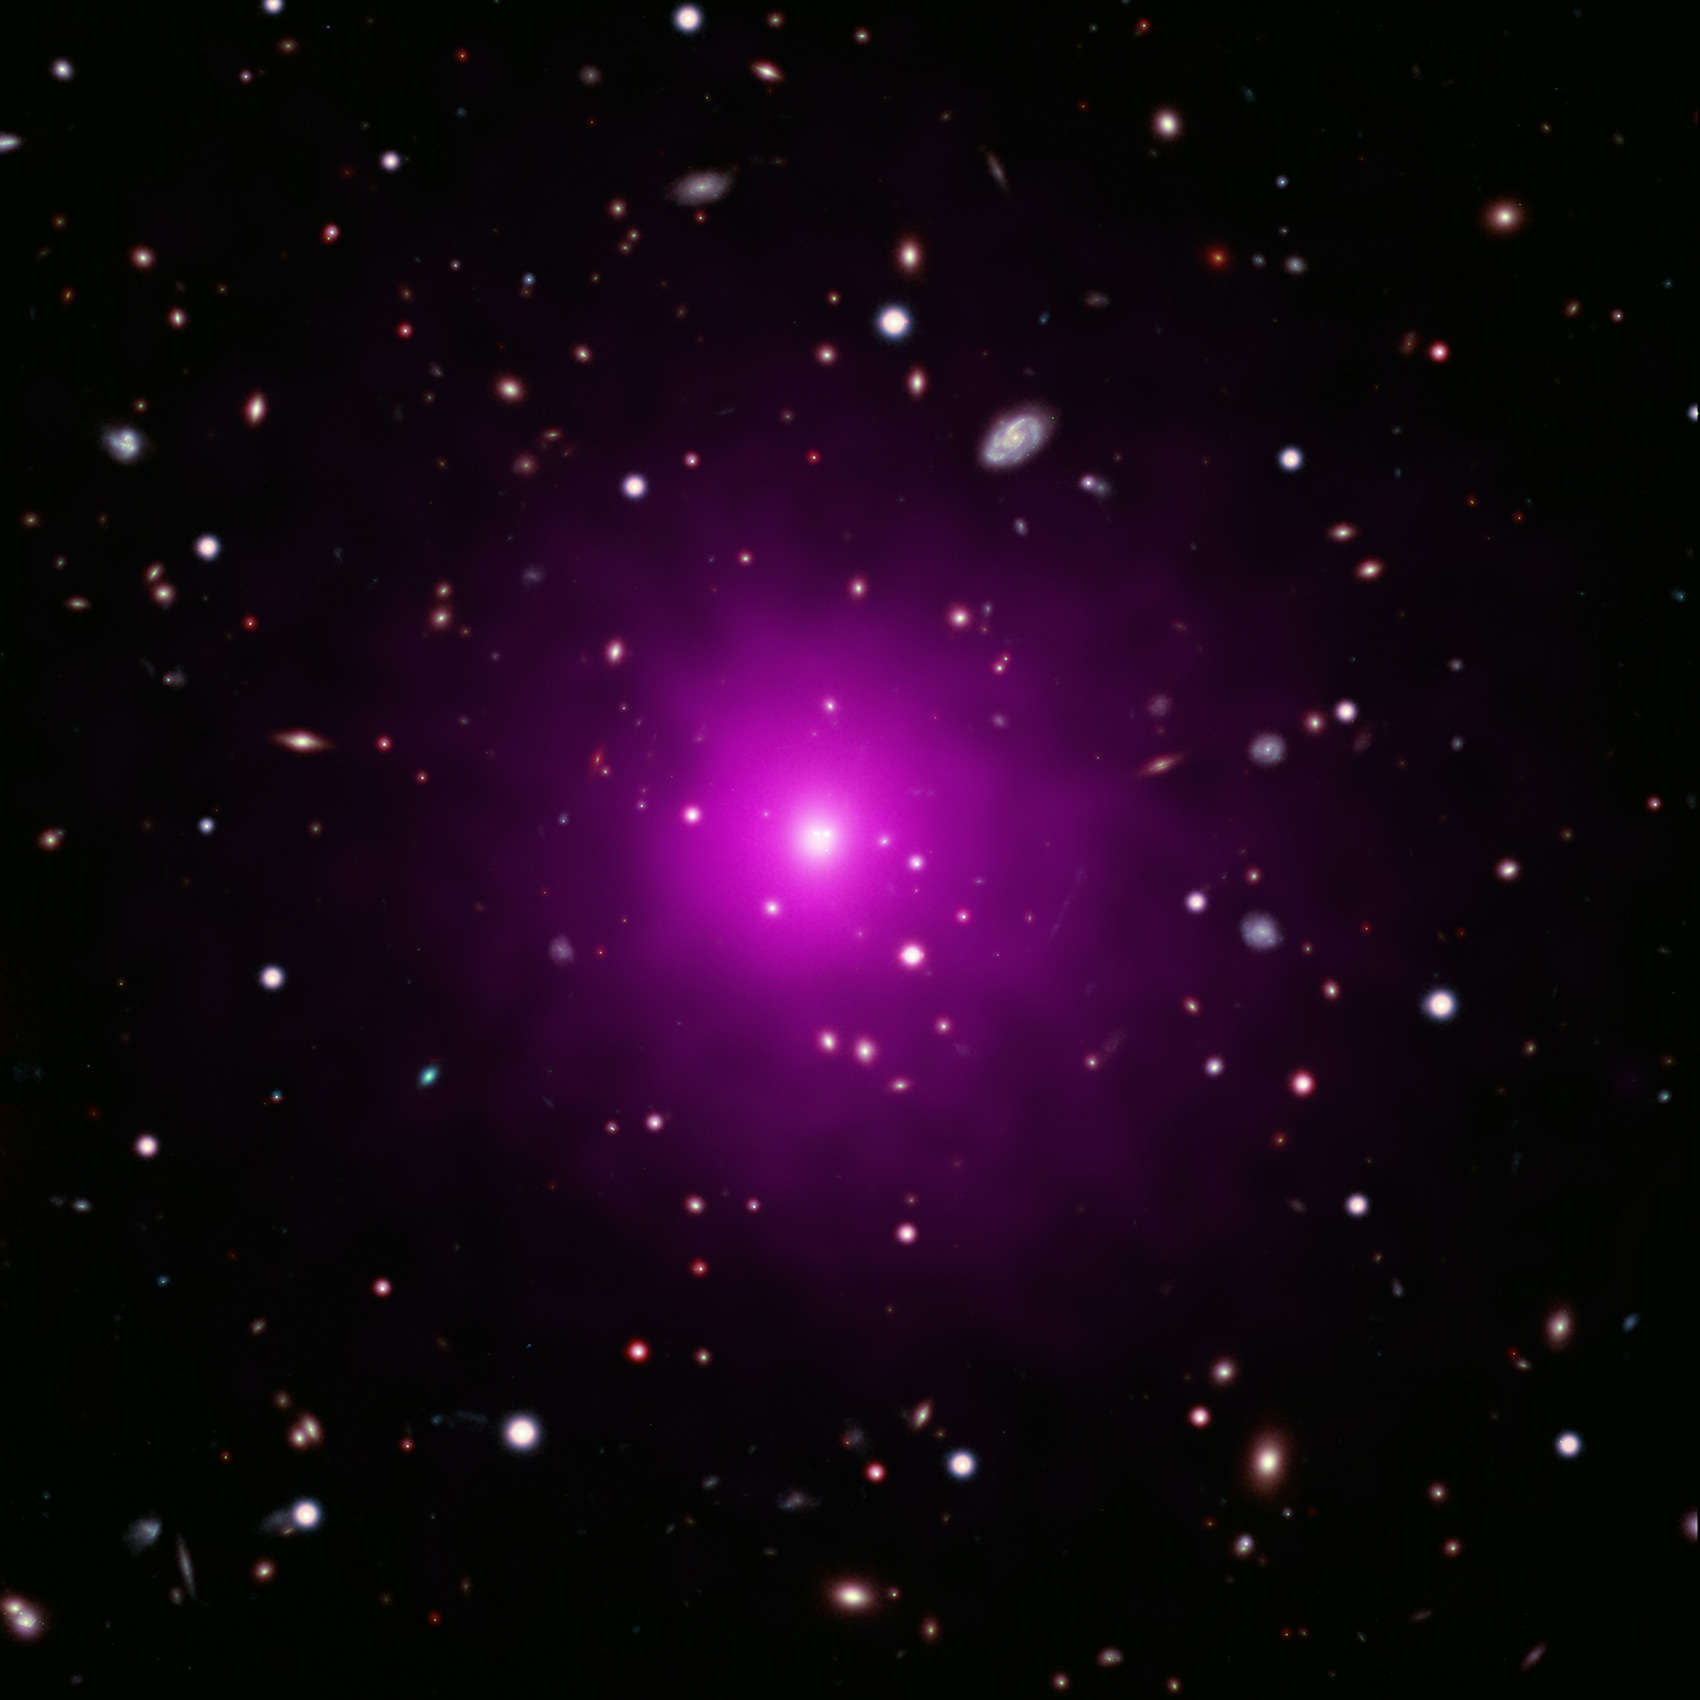 X-ray (purple) and visible light composite of the center of the galaxy cluster Abell 2261. 